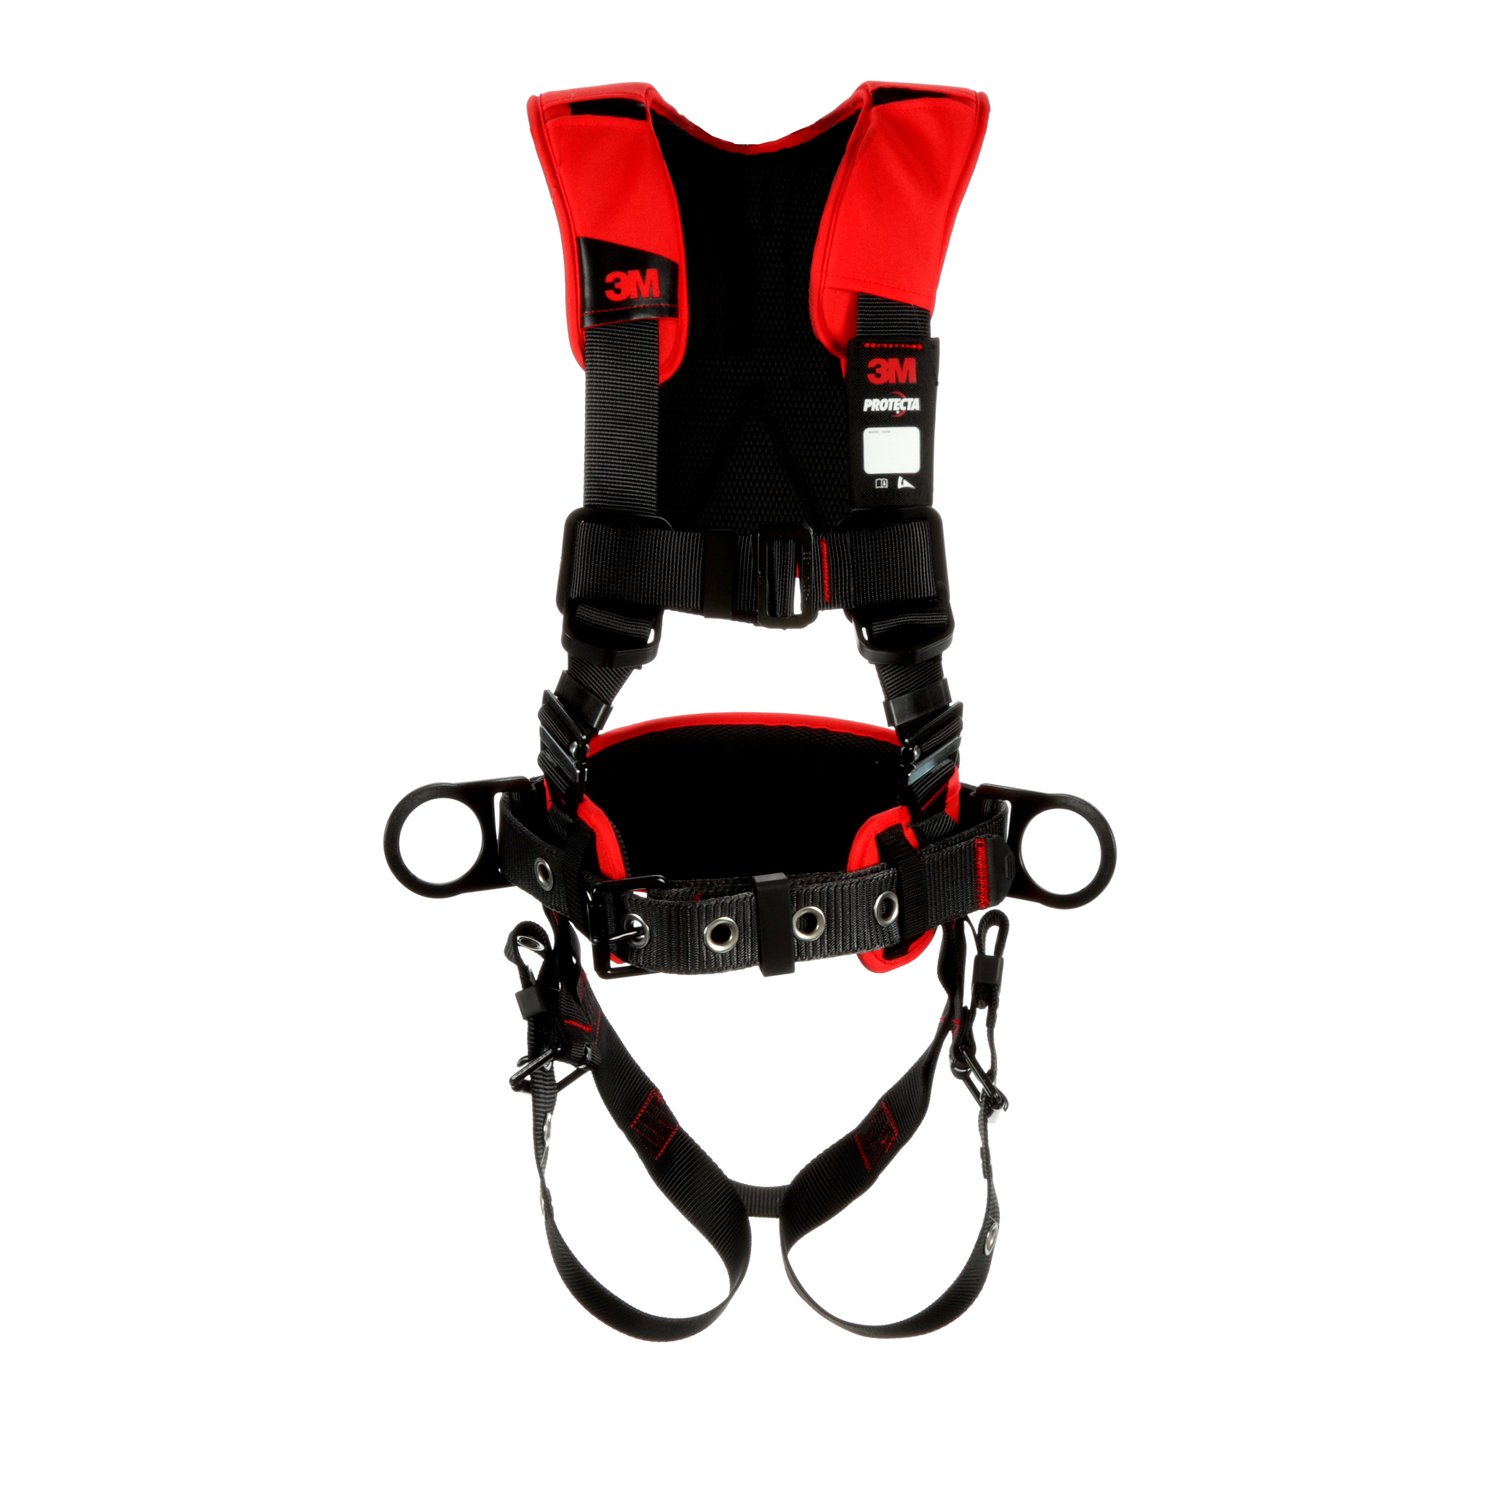 7100232015 - 3M Protecta P200 Comfort Construction Positioning Safety Harness
1161208, 2X